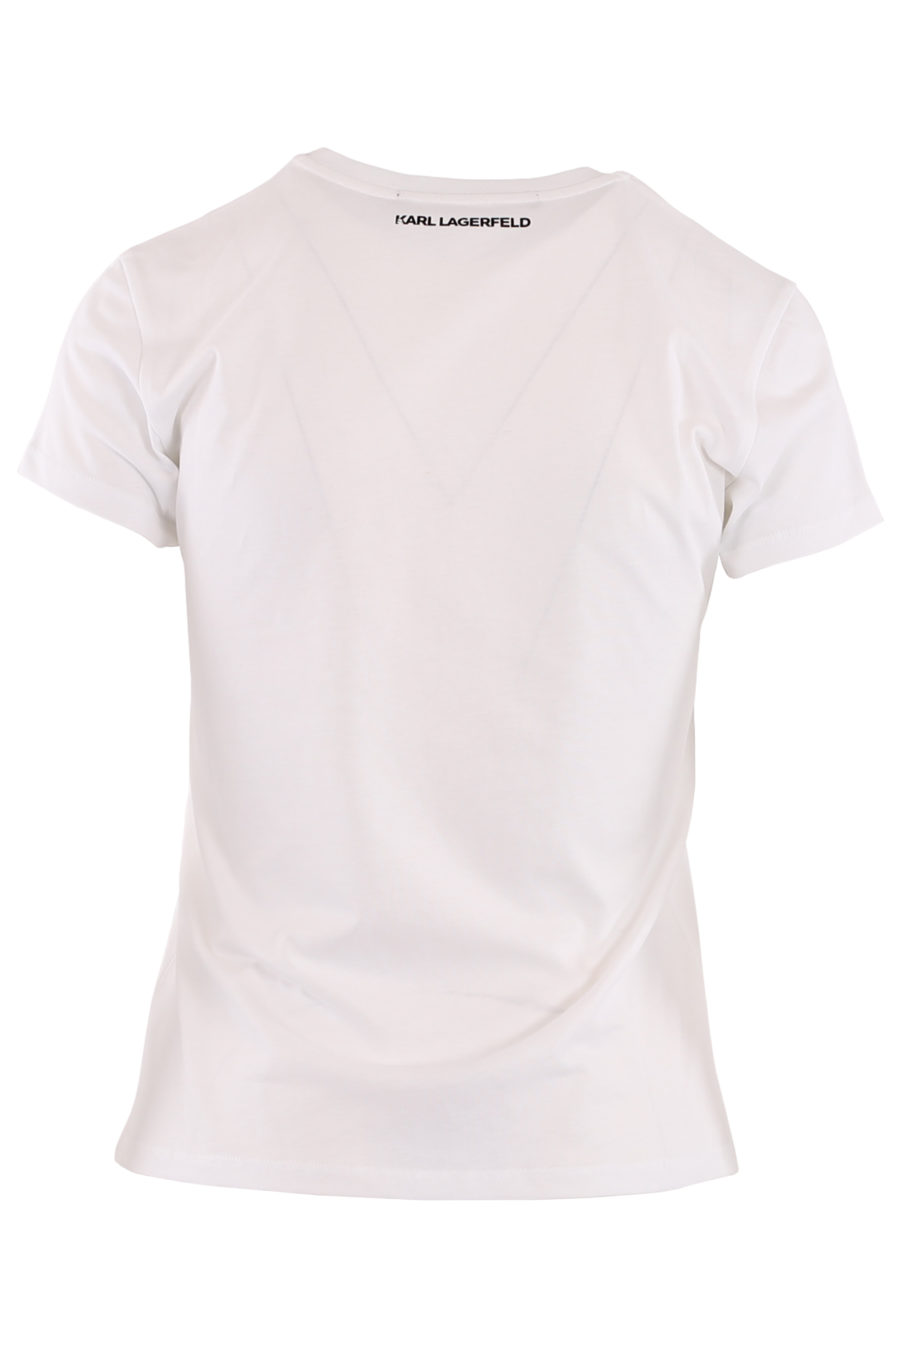 White T-shirt with "Choupette" - 486504977126b86bfd9d9eb5714e3b2aa5d31ad9